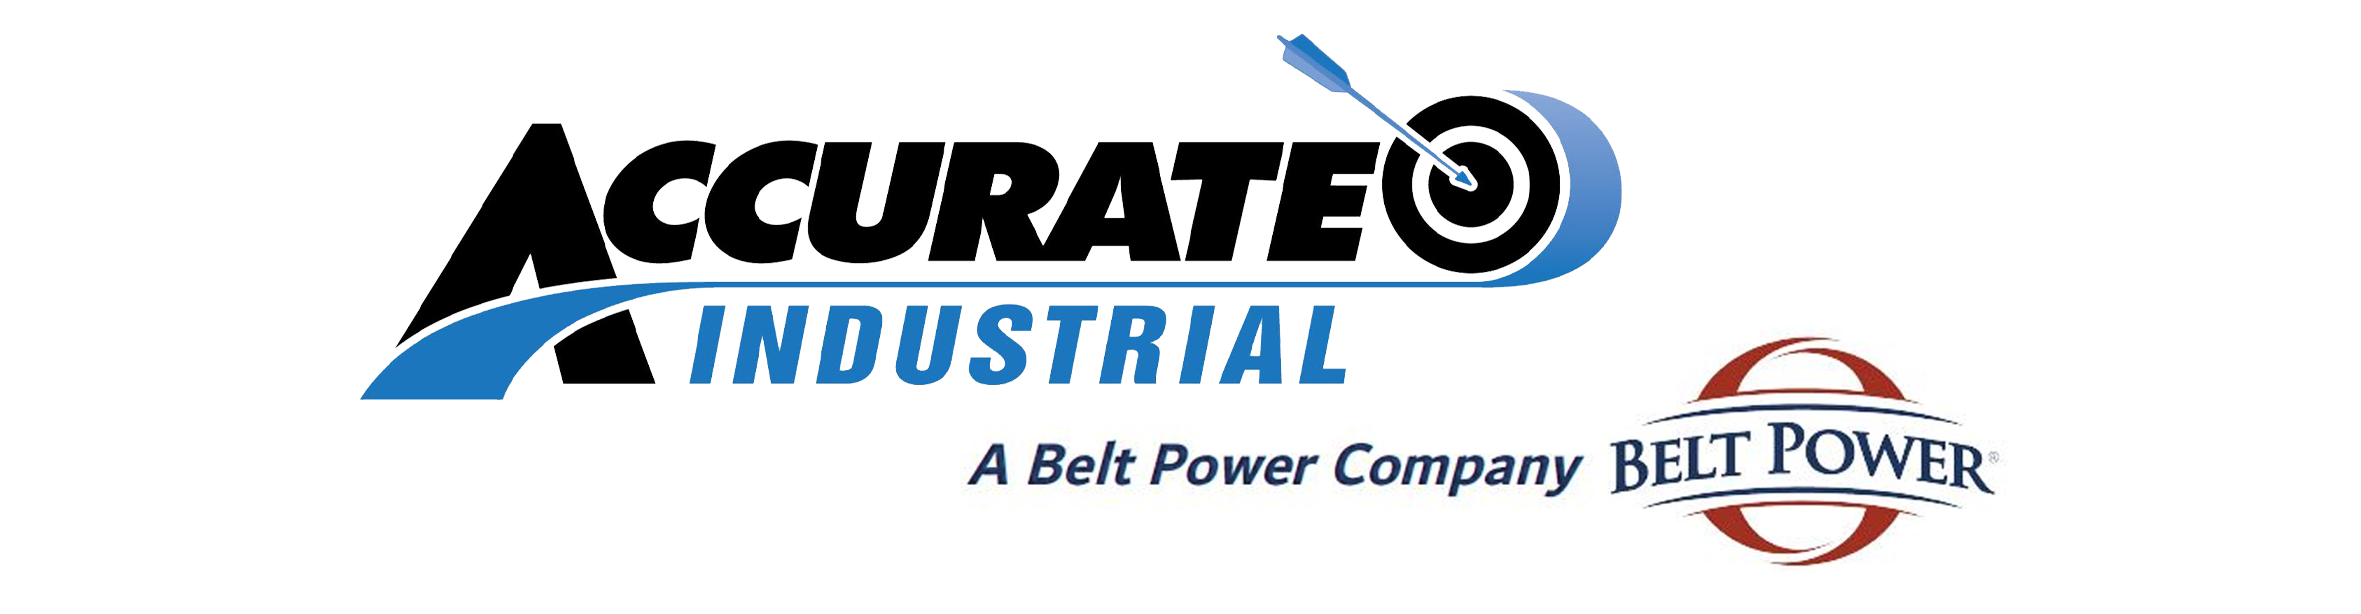 https://accurateindustrial.com/wp-content/uploads/2022/02/Accurate_Industrial_A_Belt_Power_Company_Round_Shape_Logo_Option3.png